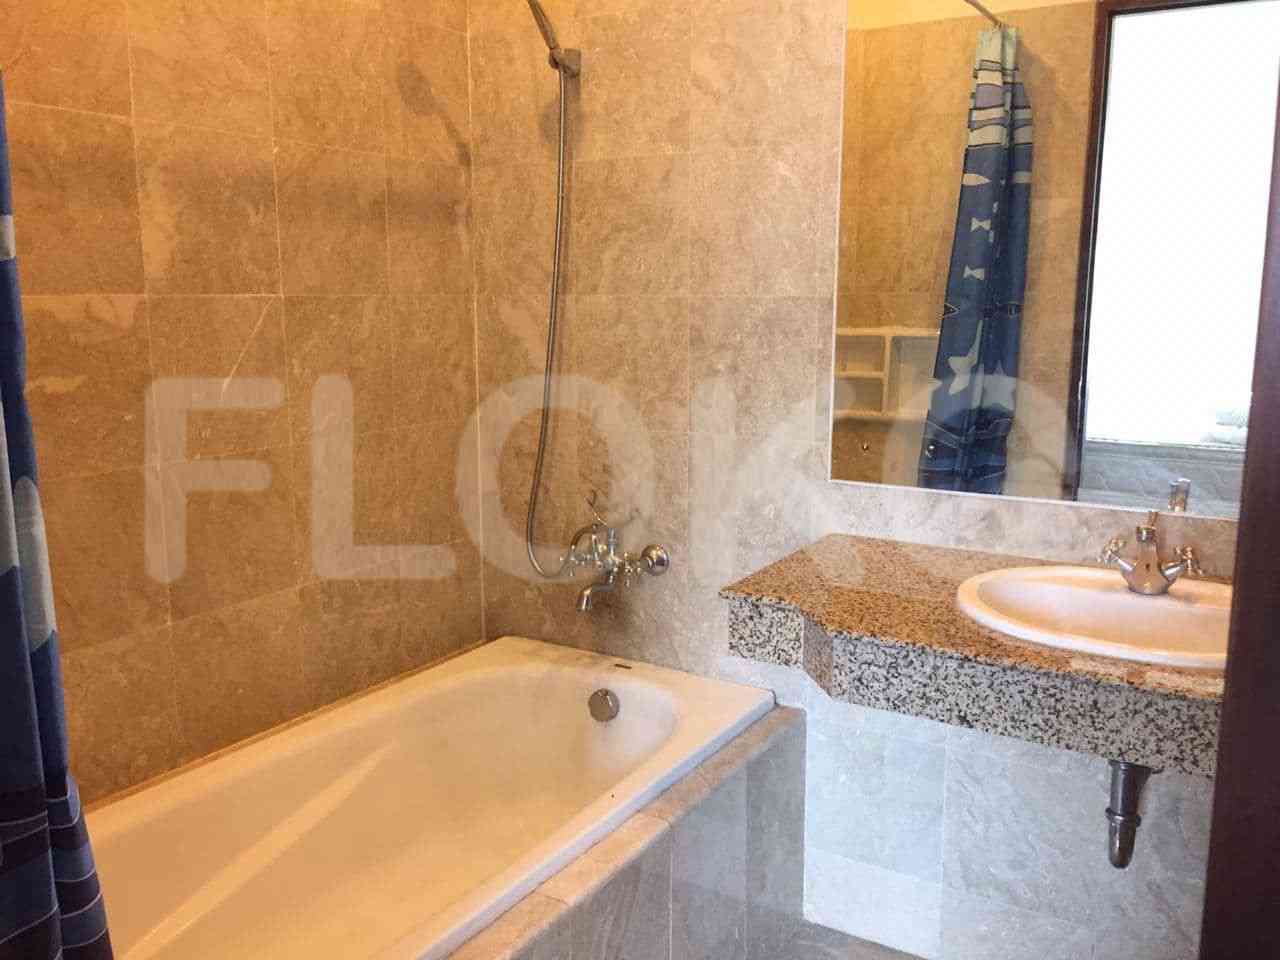 2 Bedroom on 18th Floor for Rent in Bellezza Apartment - fpe84b 5